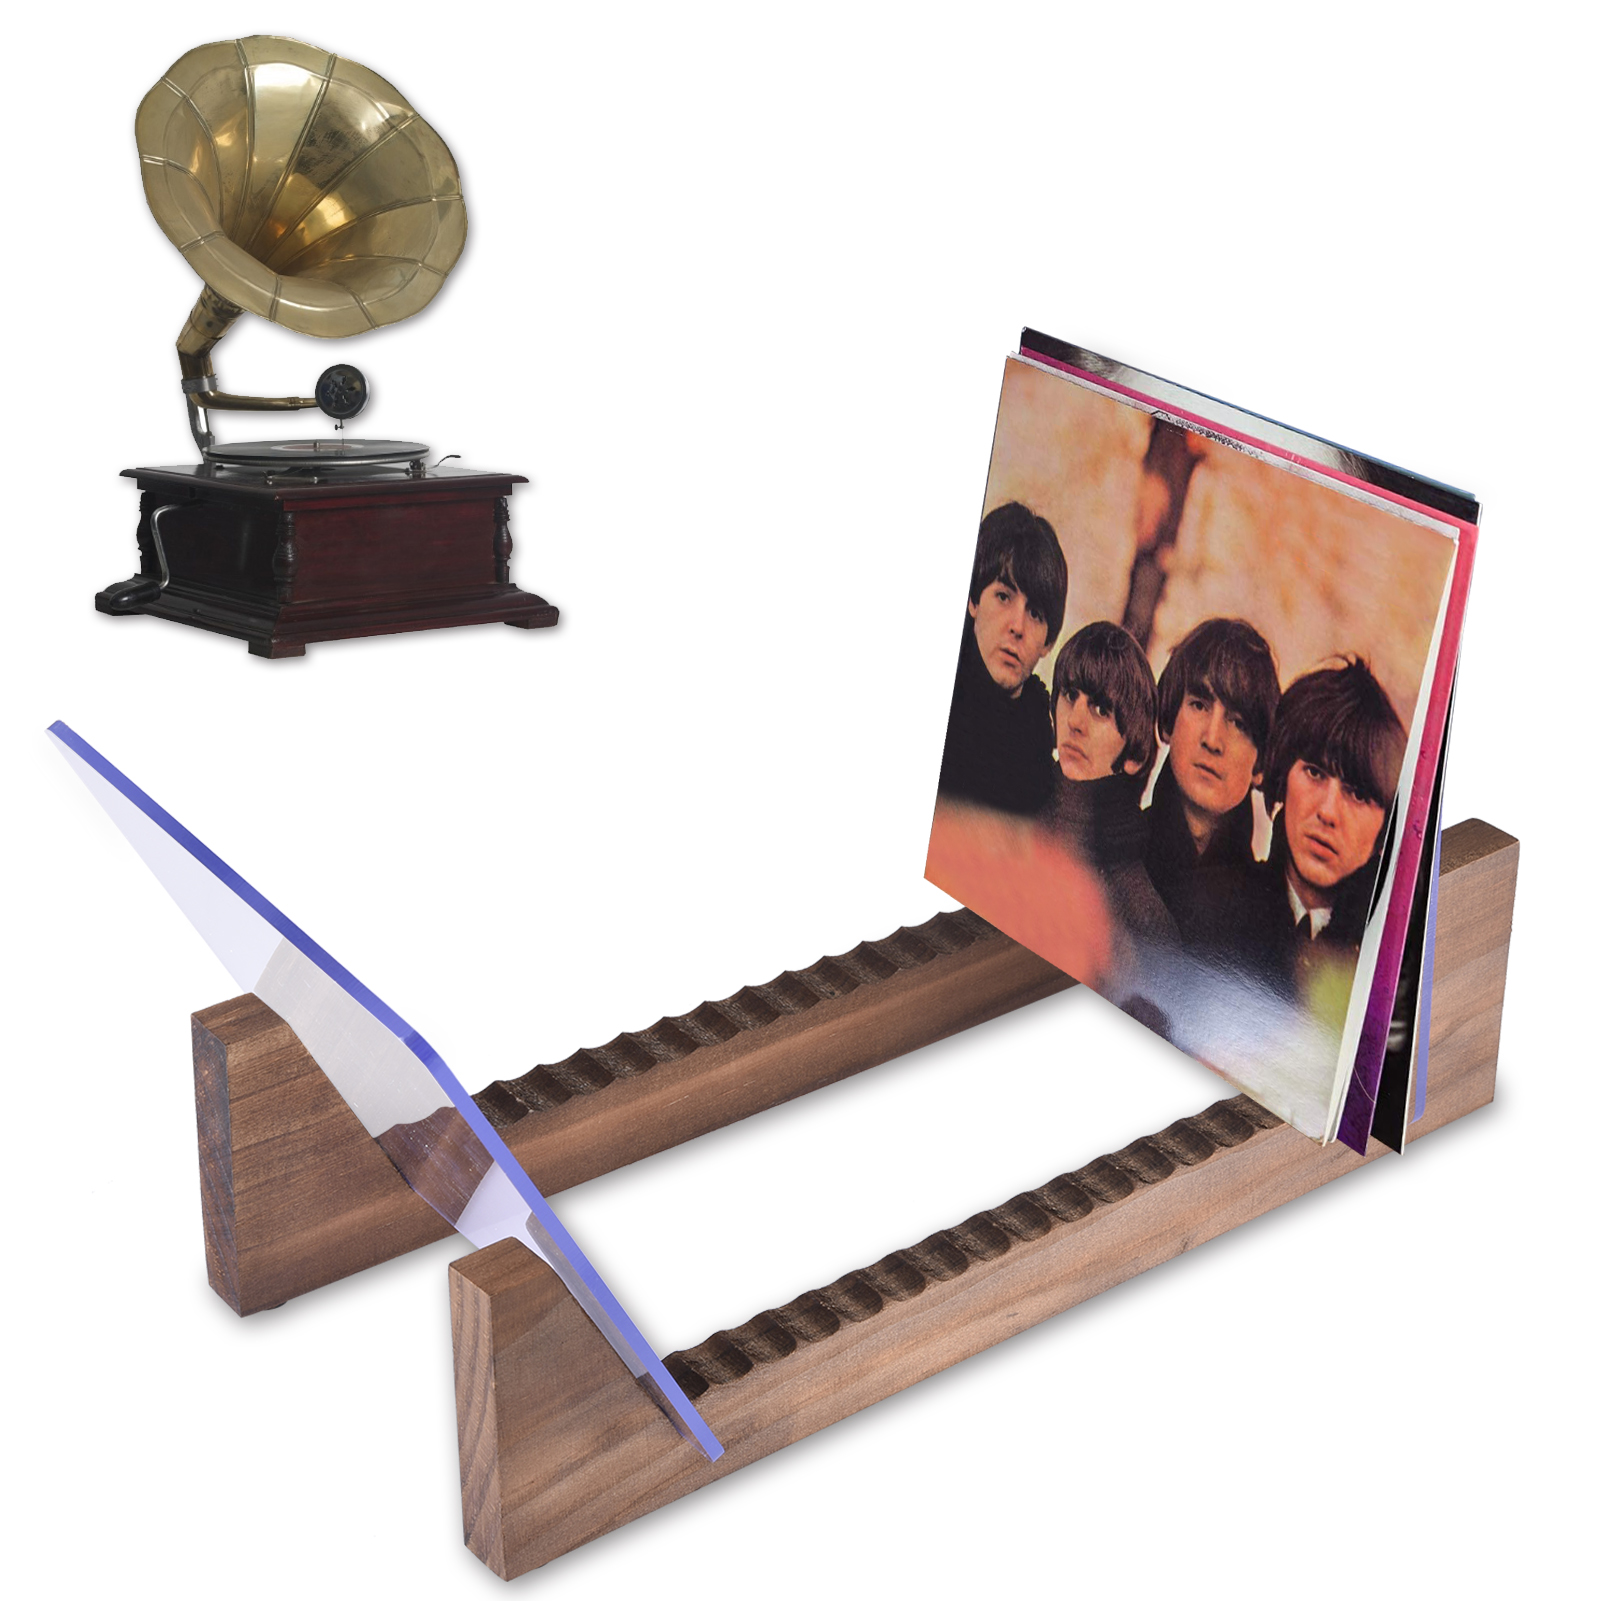 Vinyl Record Storage Holder Pine Wood Record CD Display Stand For Music Lovers Holds Up To 25 Albums Home Desk Decoration Crafts